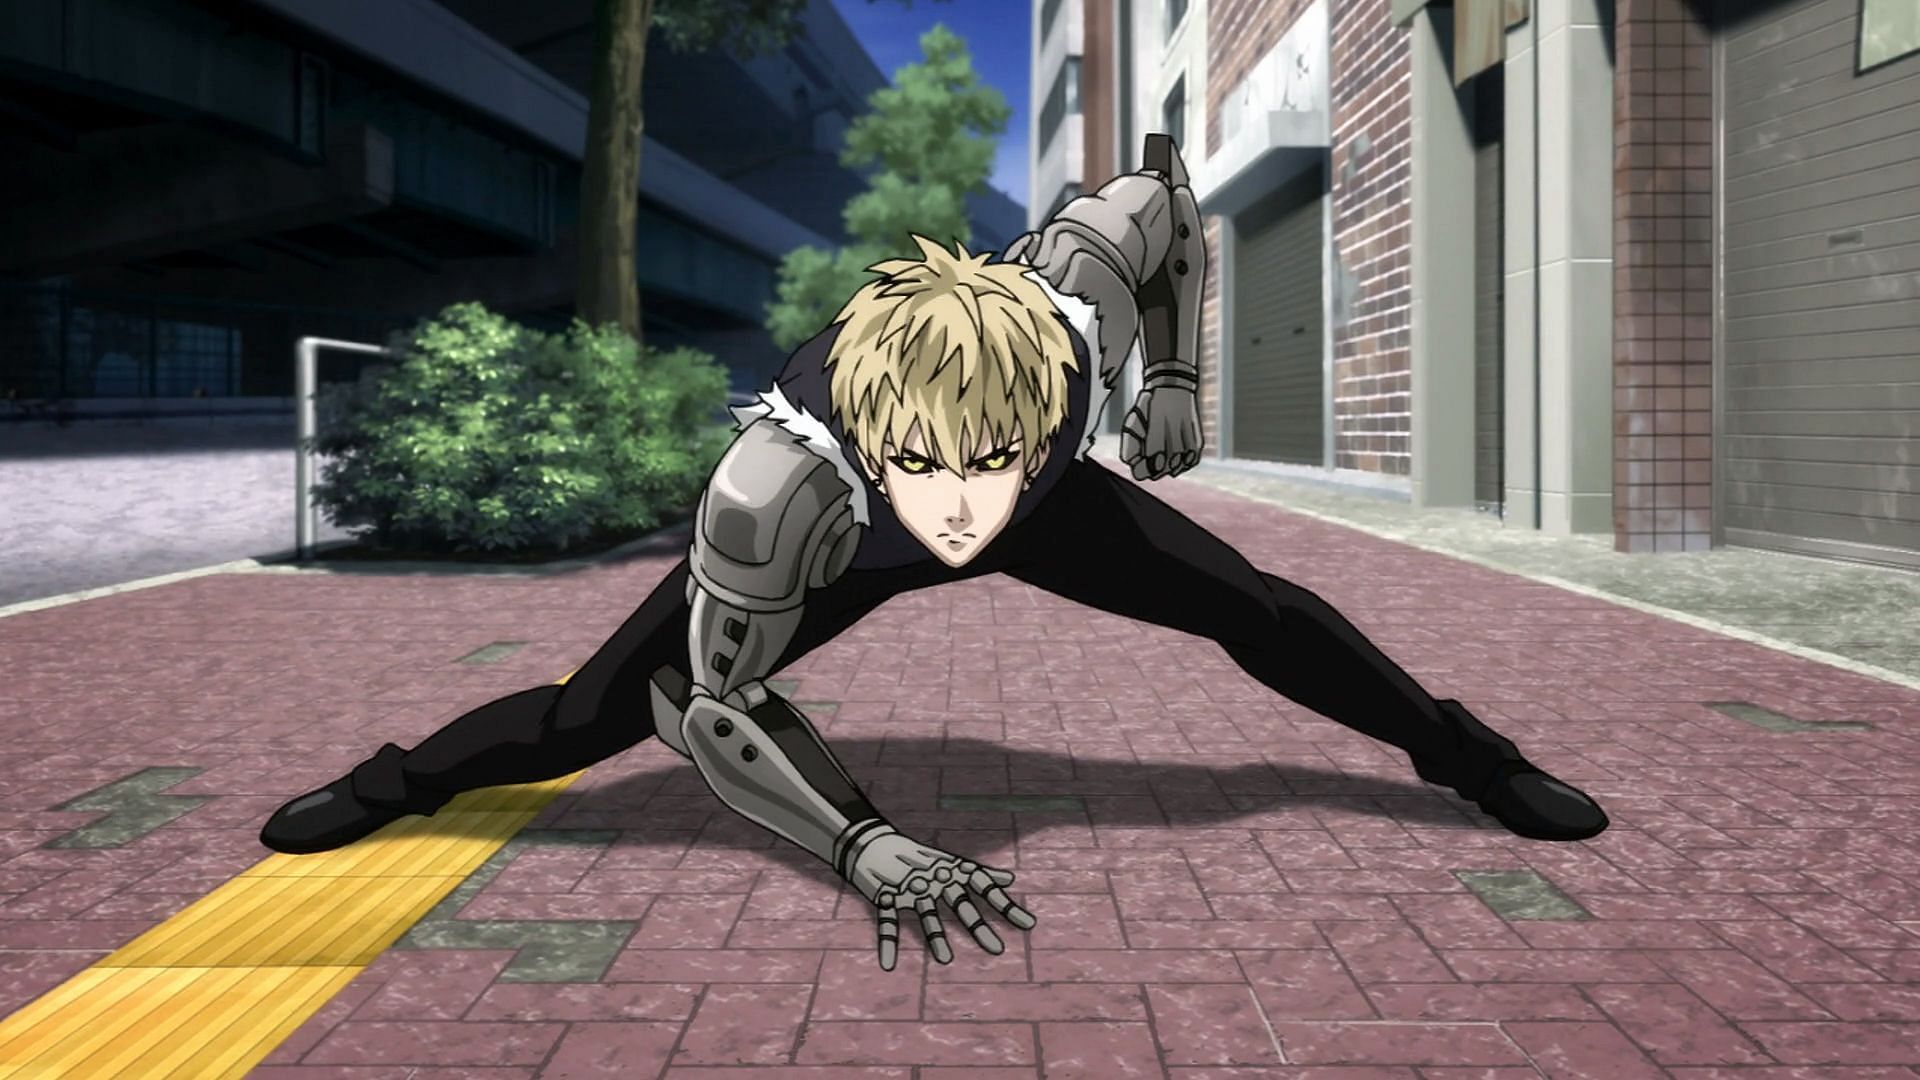 What fan of One Punch Man does not love Genos? (Image via ONE, One Punch Man)